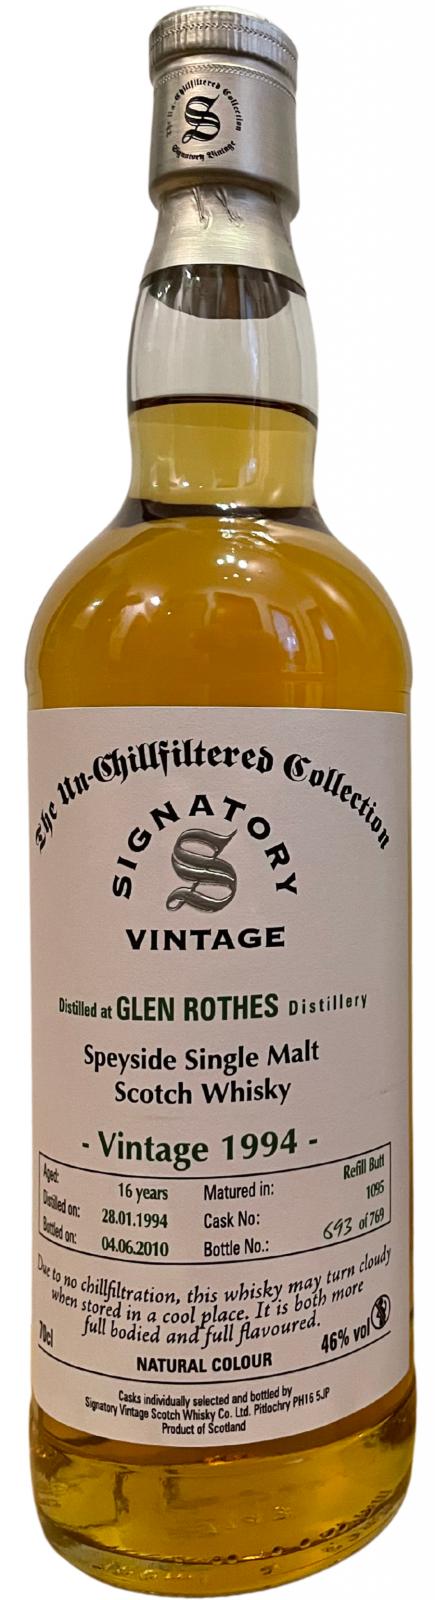 Glenrothes 1994 SV The Un-Chillfiltered Collection Refill Butt #1095 46% 700ml